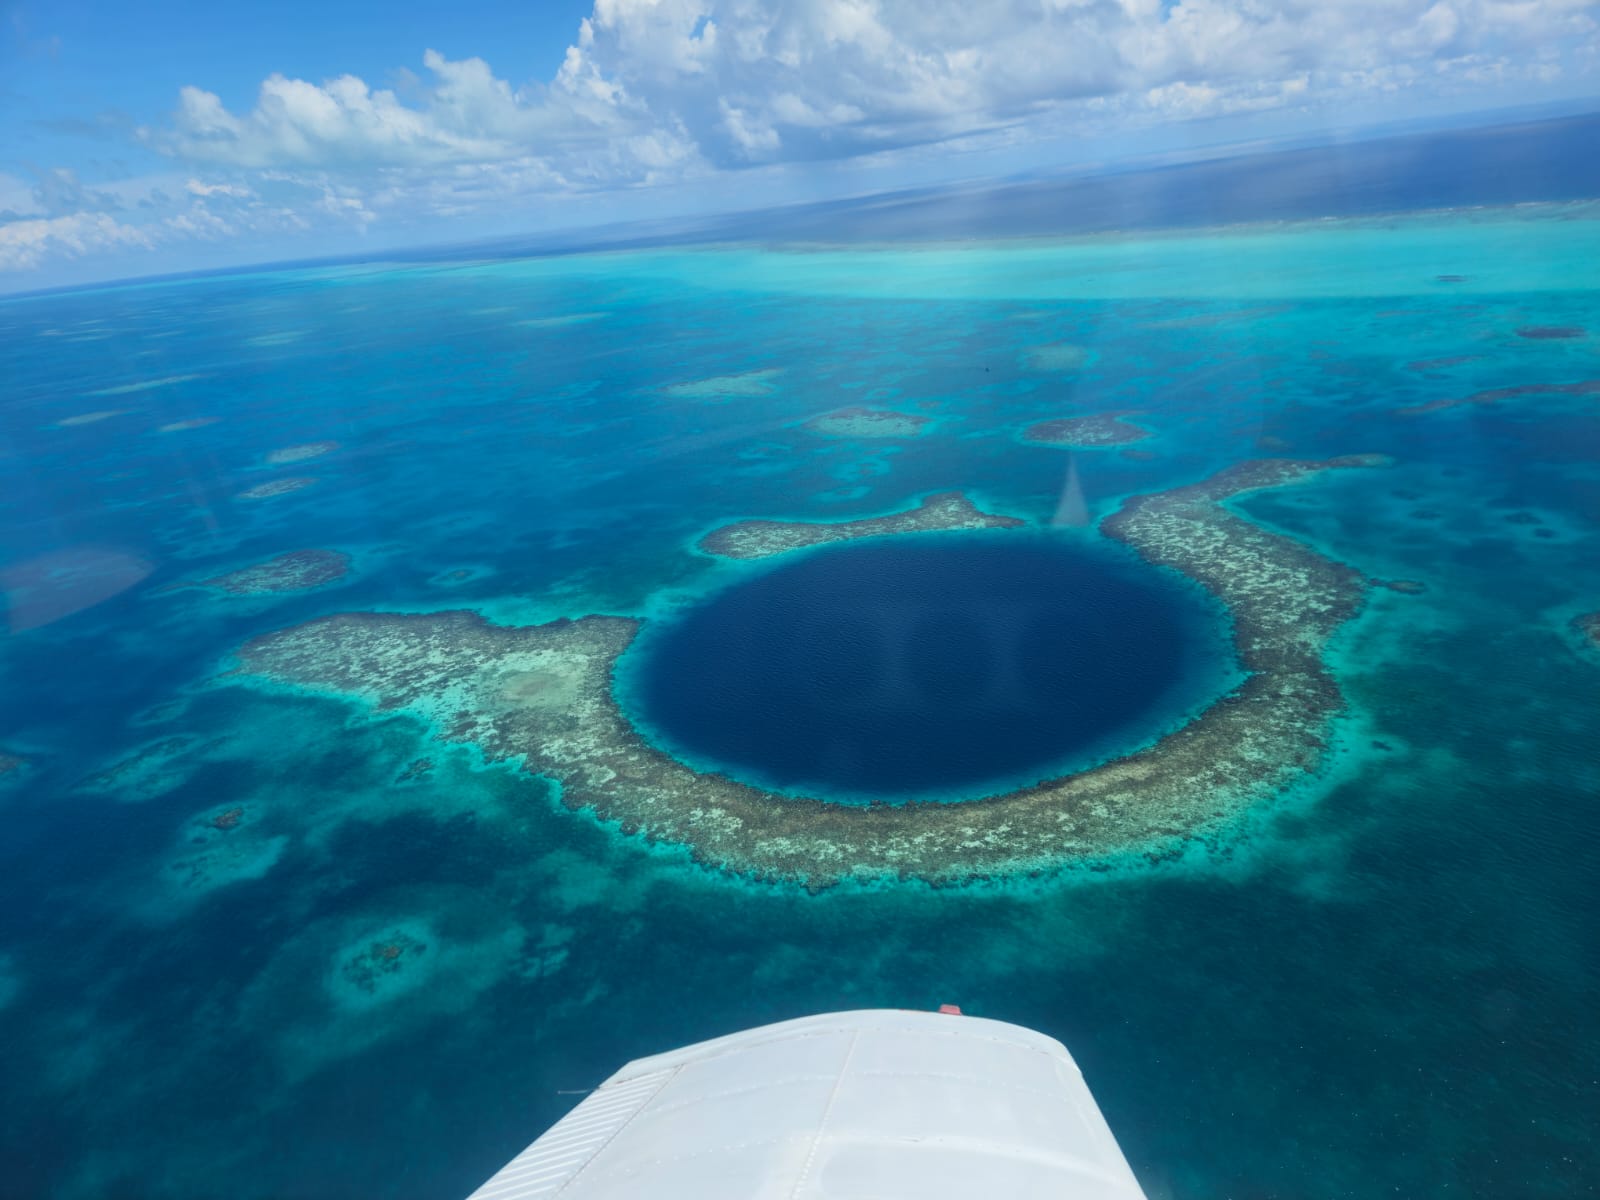 How to See the Great Blue Hole Belize - Scenic Flight vs Scuba Diving